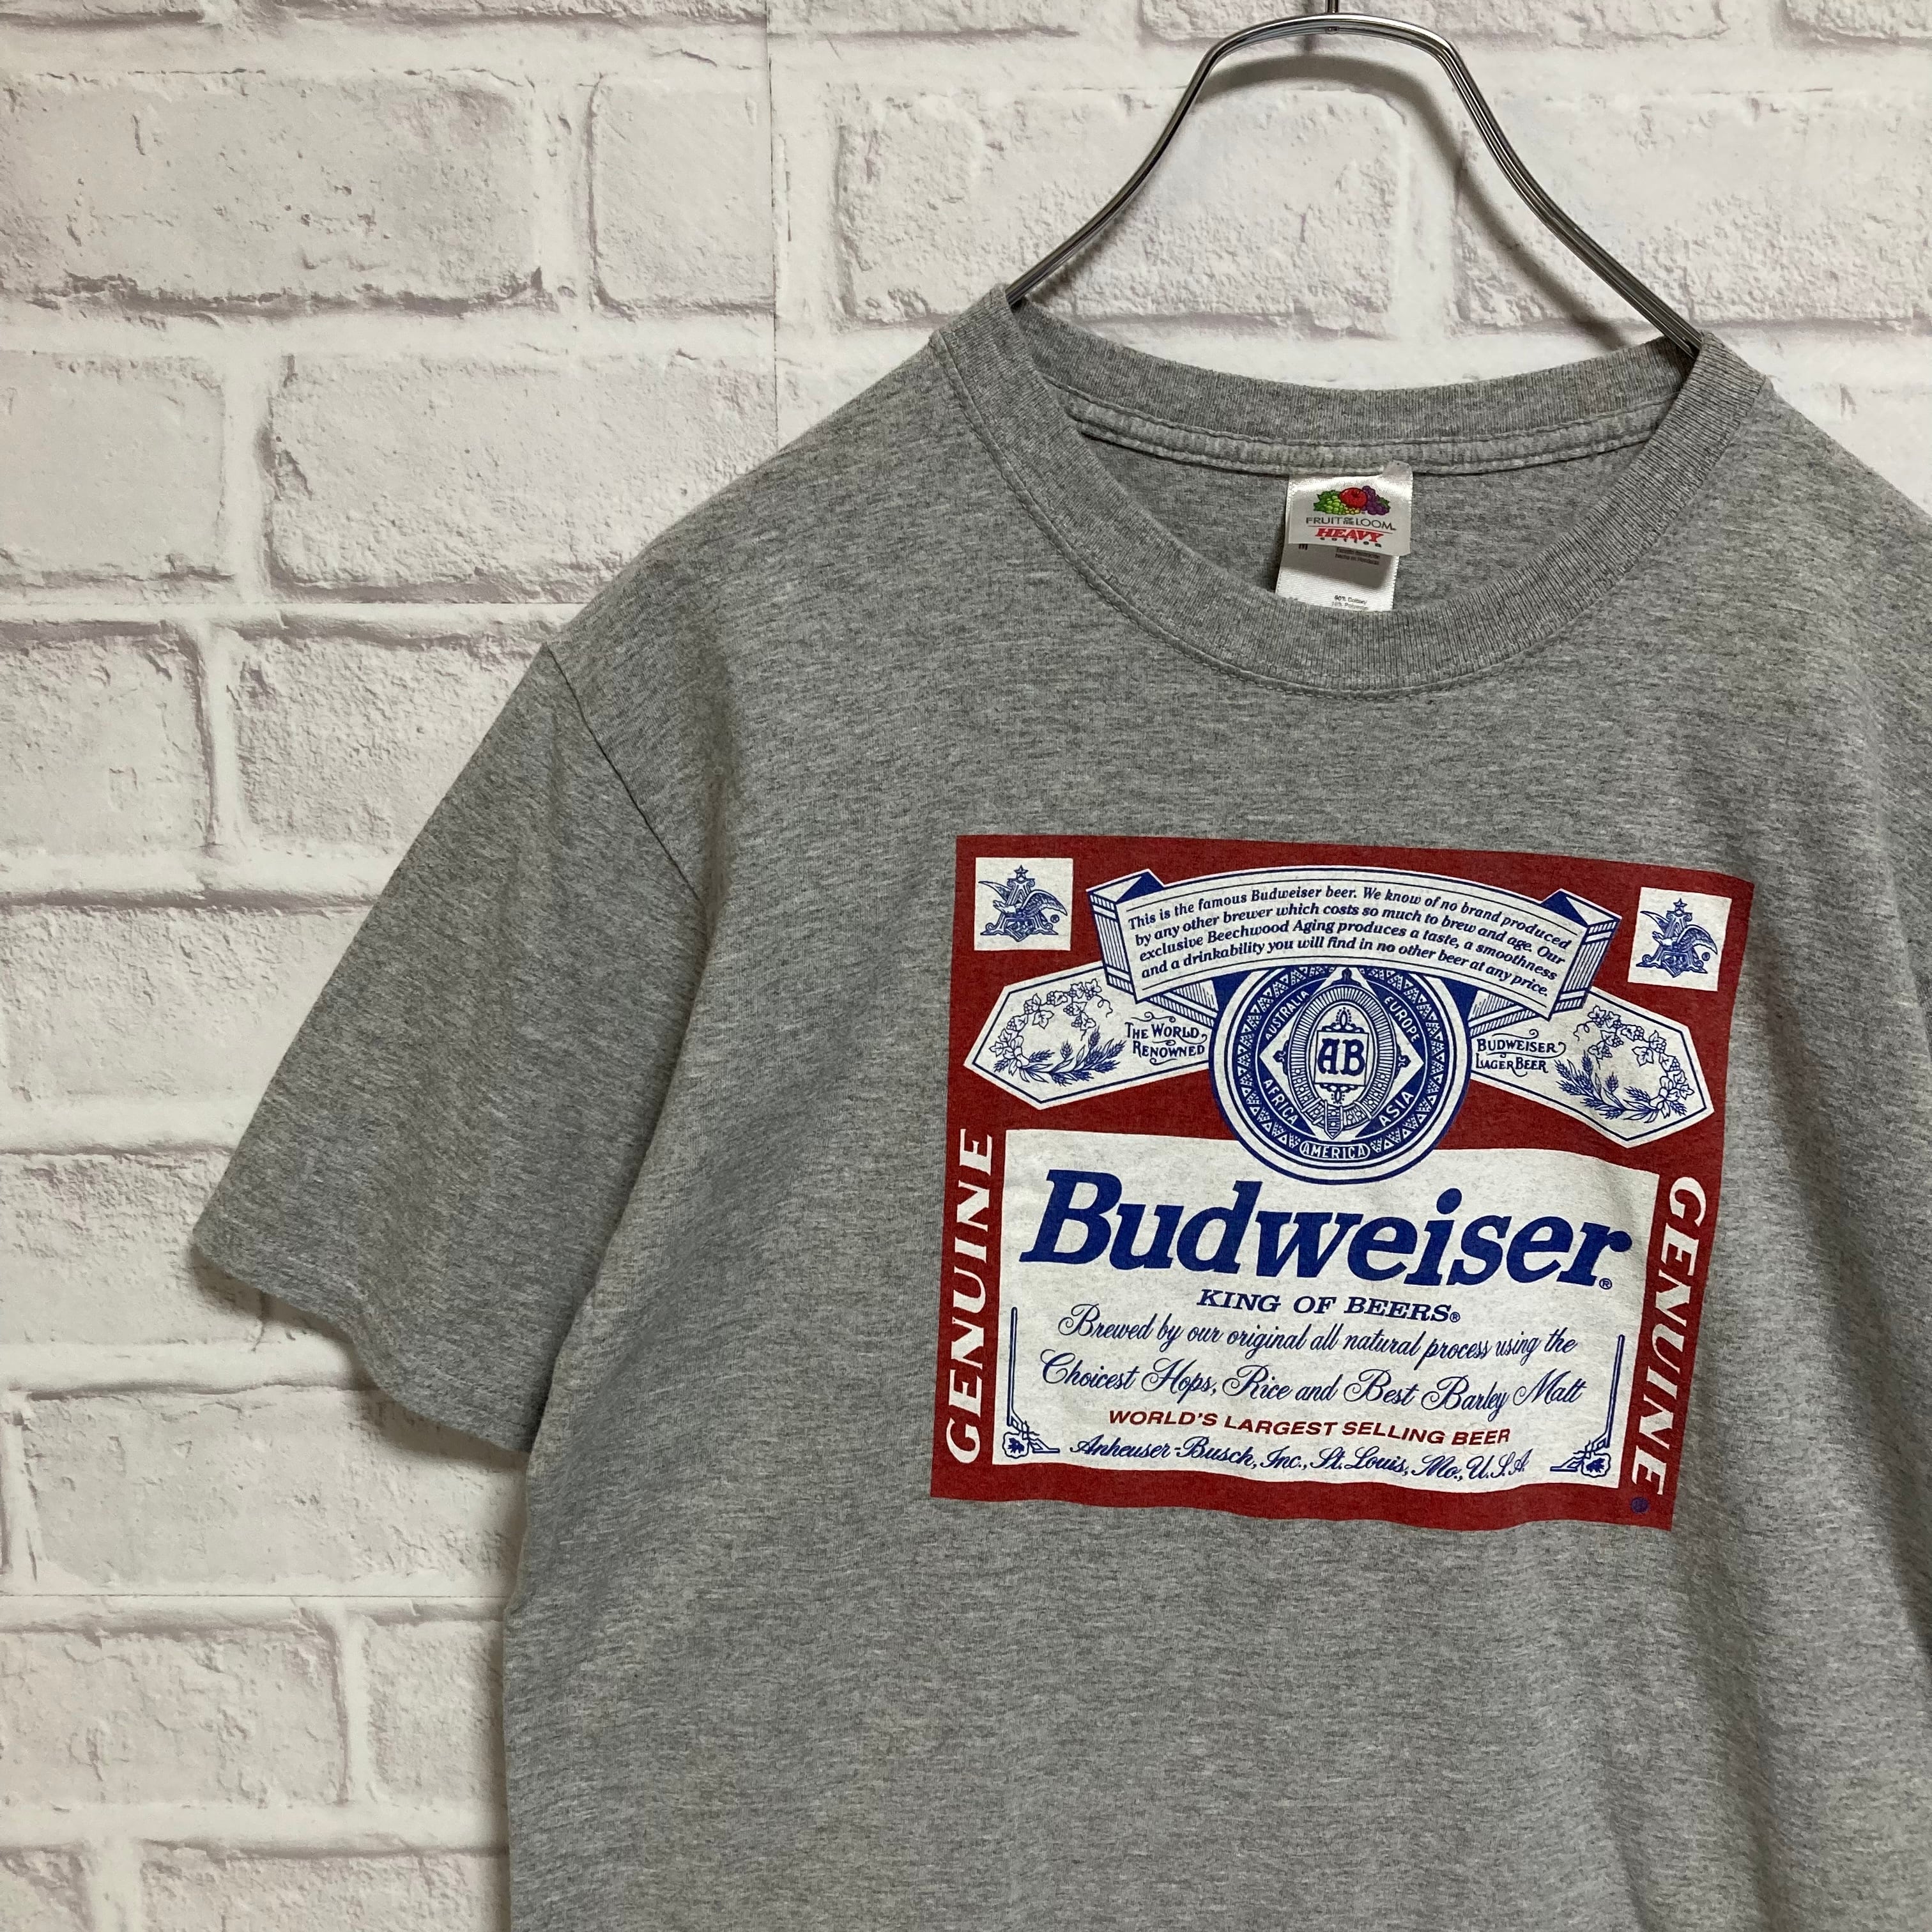 FRUIT OF THE LOOMS/S Tee L相当 “Budweiser” 企業モノ アメリカン